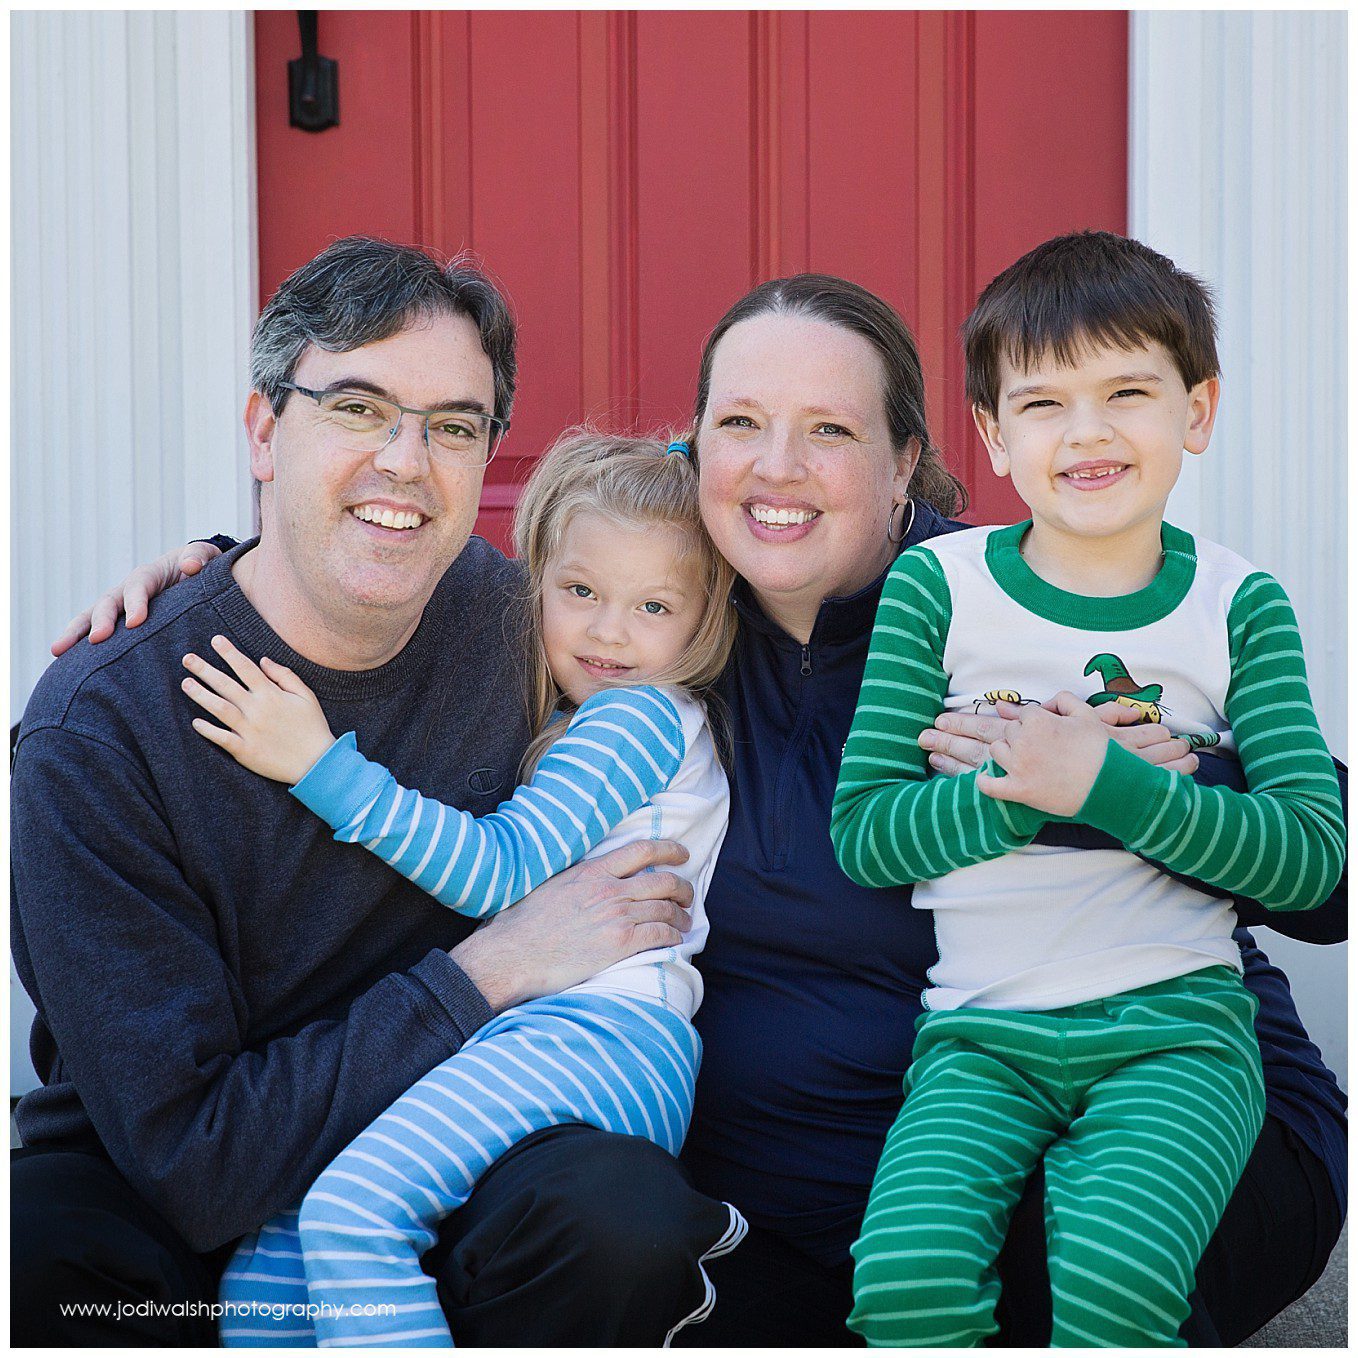 image of a family sitting together on their front porch. Dad has a little girl sitting in his lap and she's wearing blue striped pajamas. Mom has a little boy sitting in her lap and he's wearing green striped pajamas. There's a red front door behind them. This is a sample of a porch portrait taken by Jodi Walsh Photography during the 2020 pandemic.